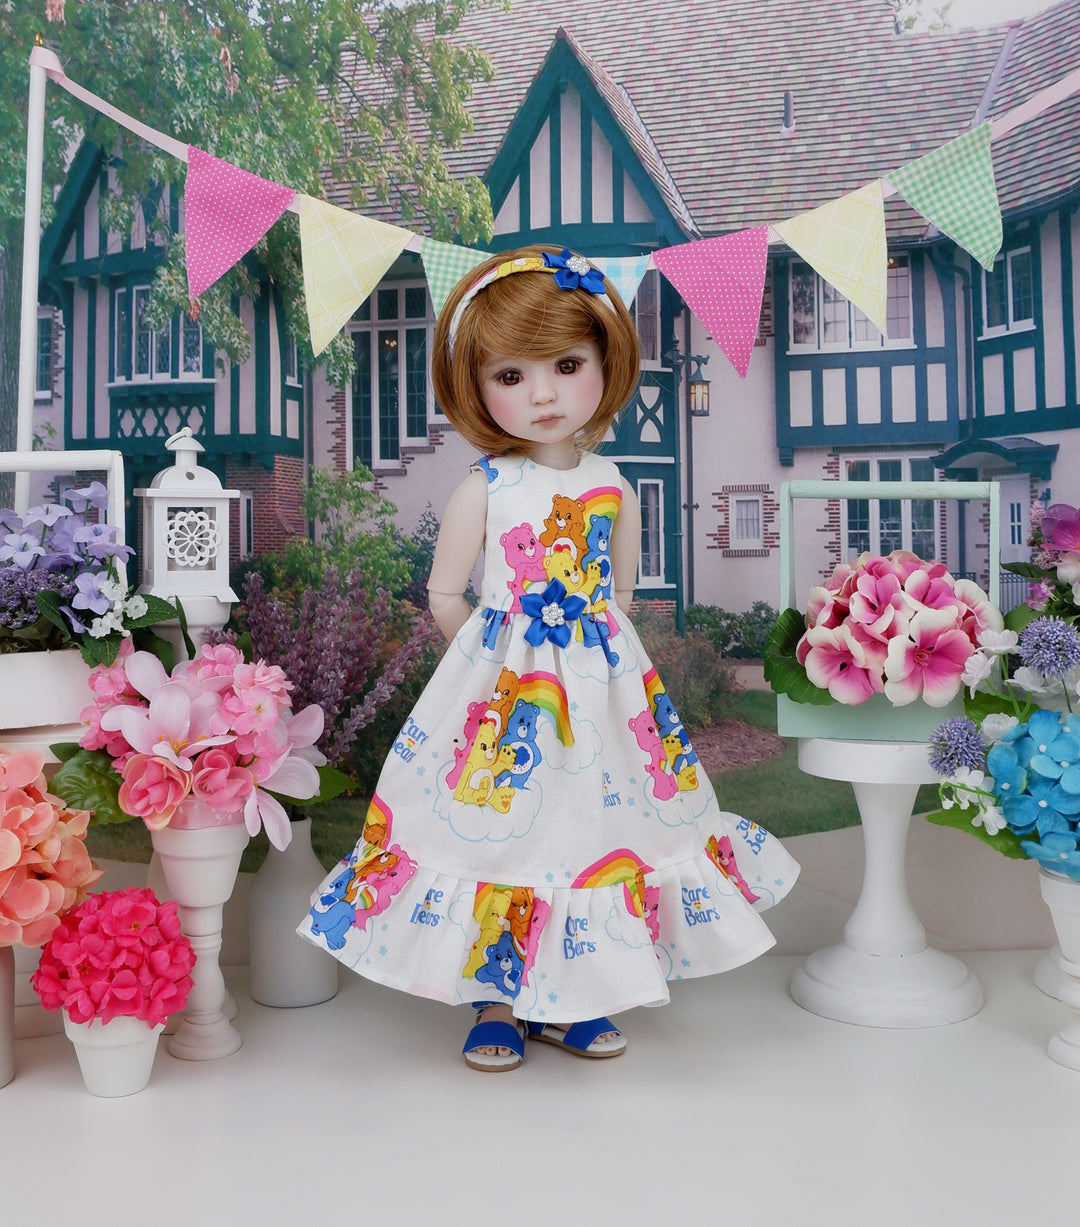 Care A Lot - dress with shoes for Ruby Red Fashion Friends doll